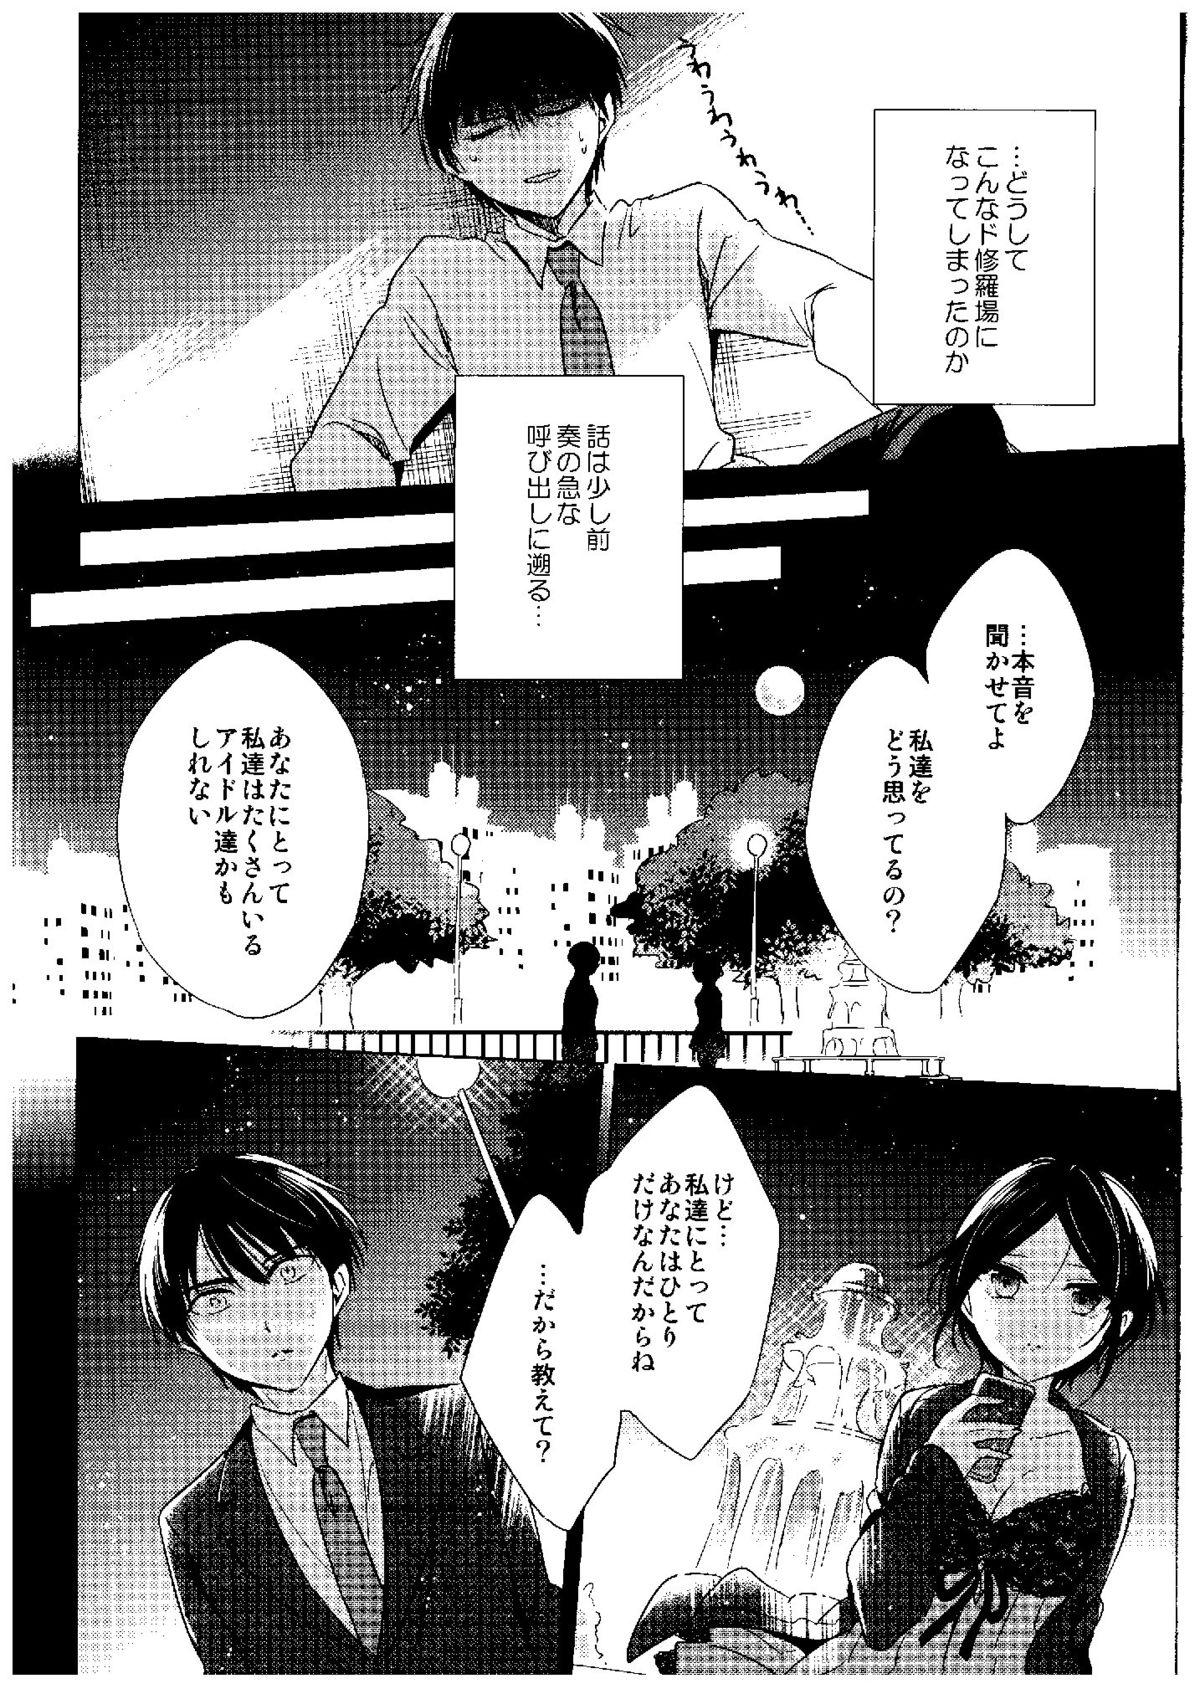 Blowing Midnight Temptation - The idolmaster Indonesia - Page 5